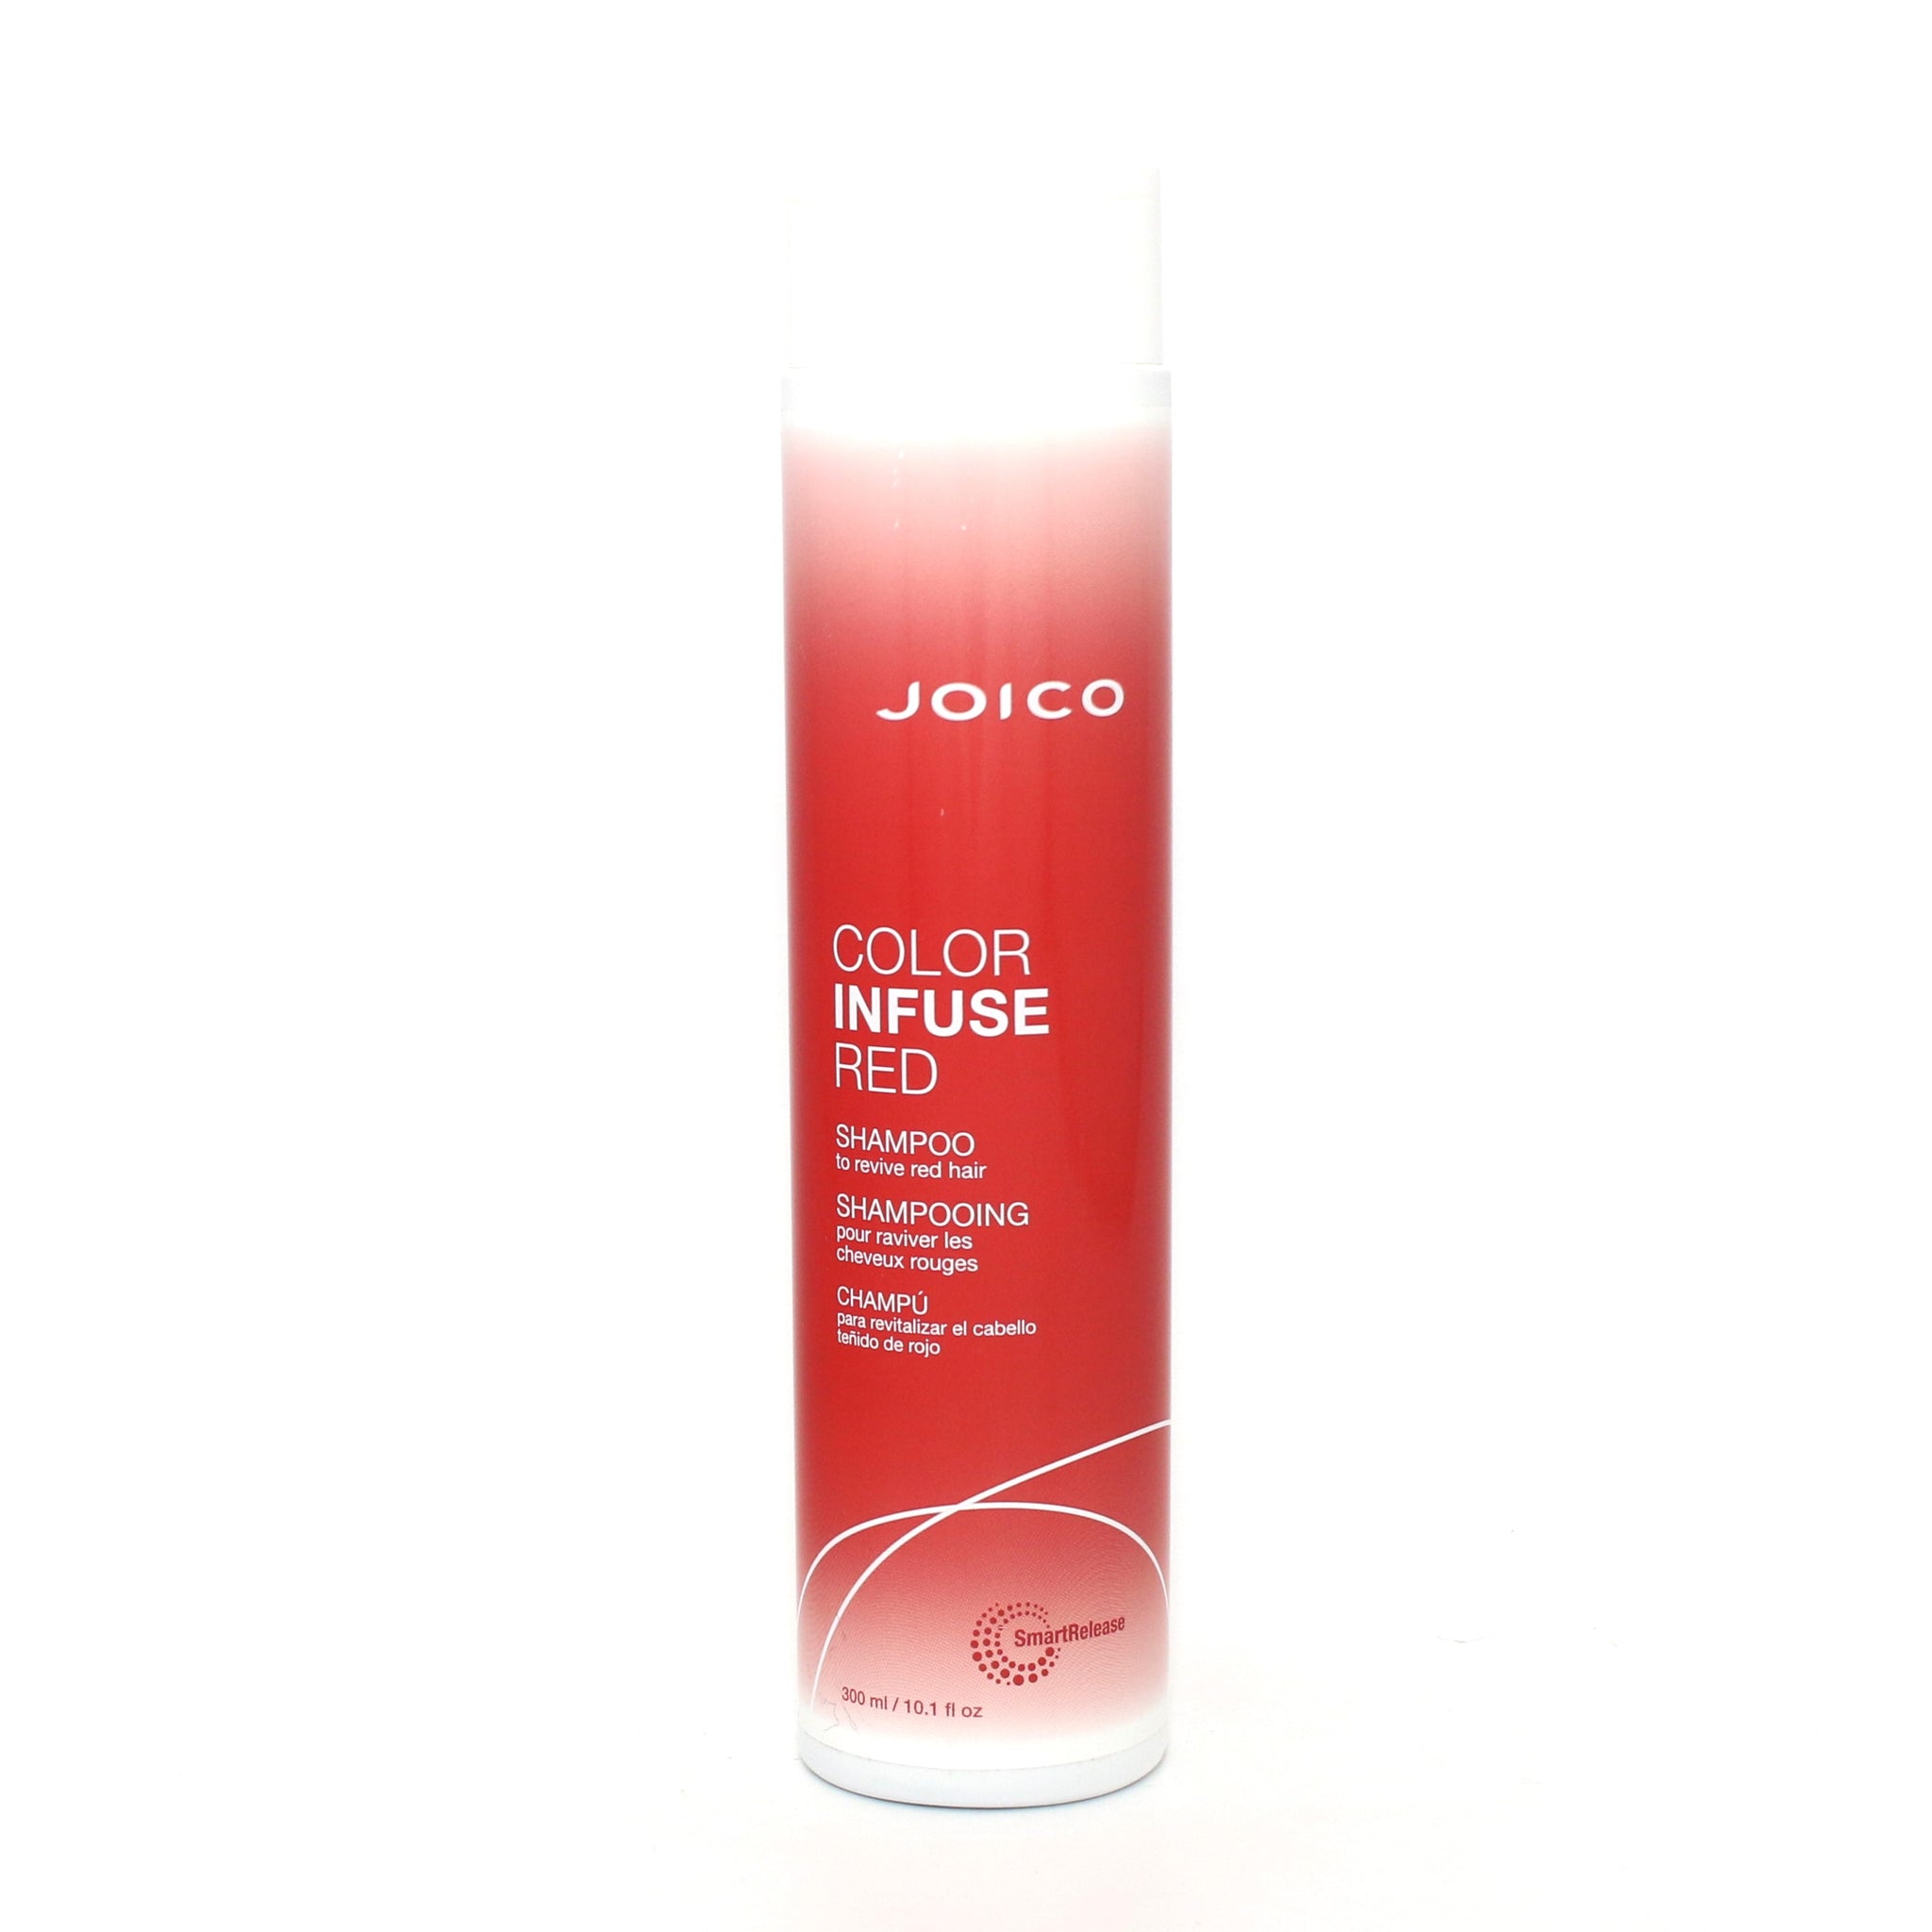 Joico Color Infused Red Shampoo and Conditioner Duo